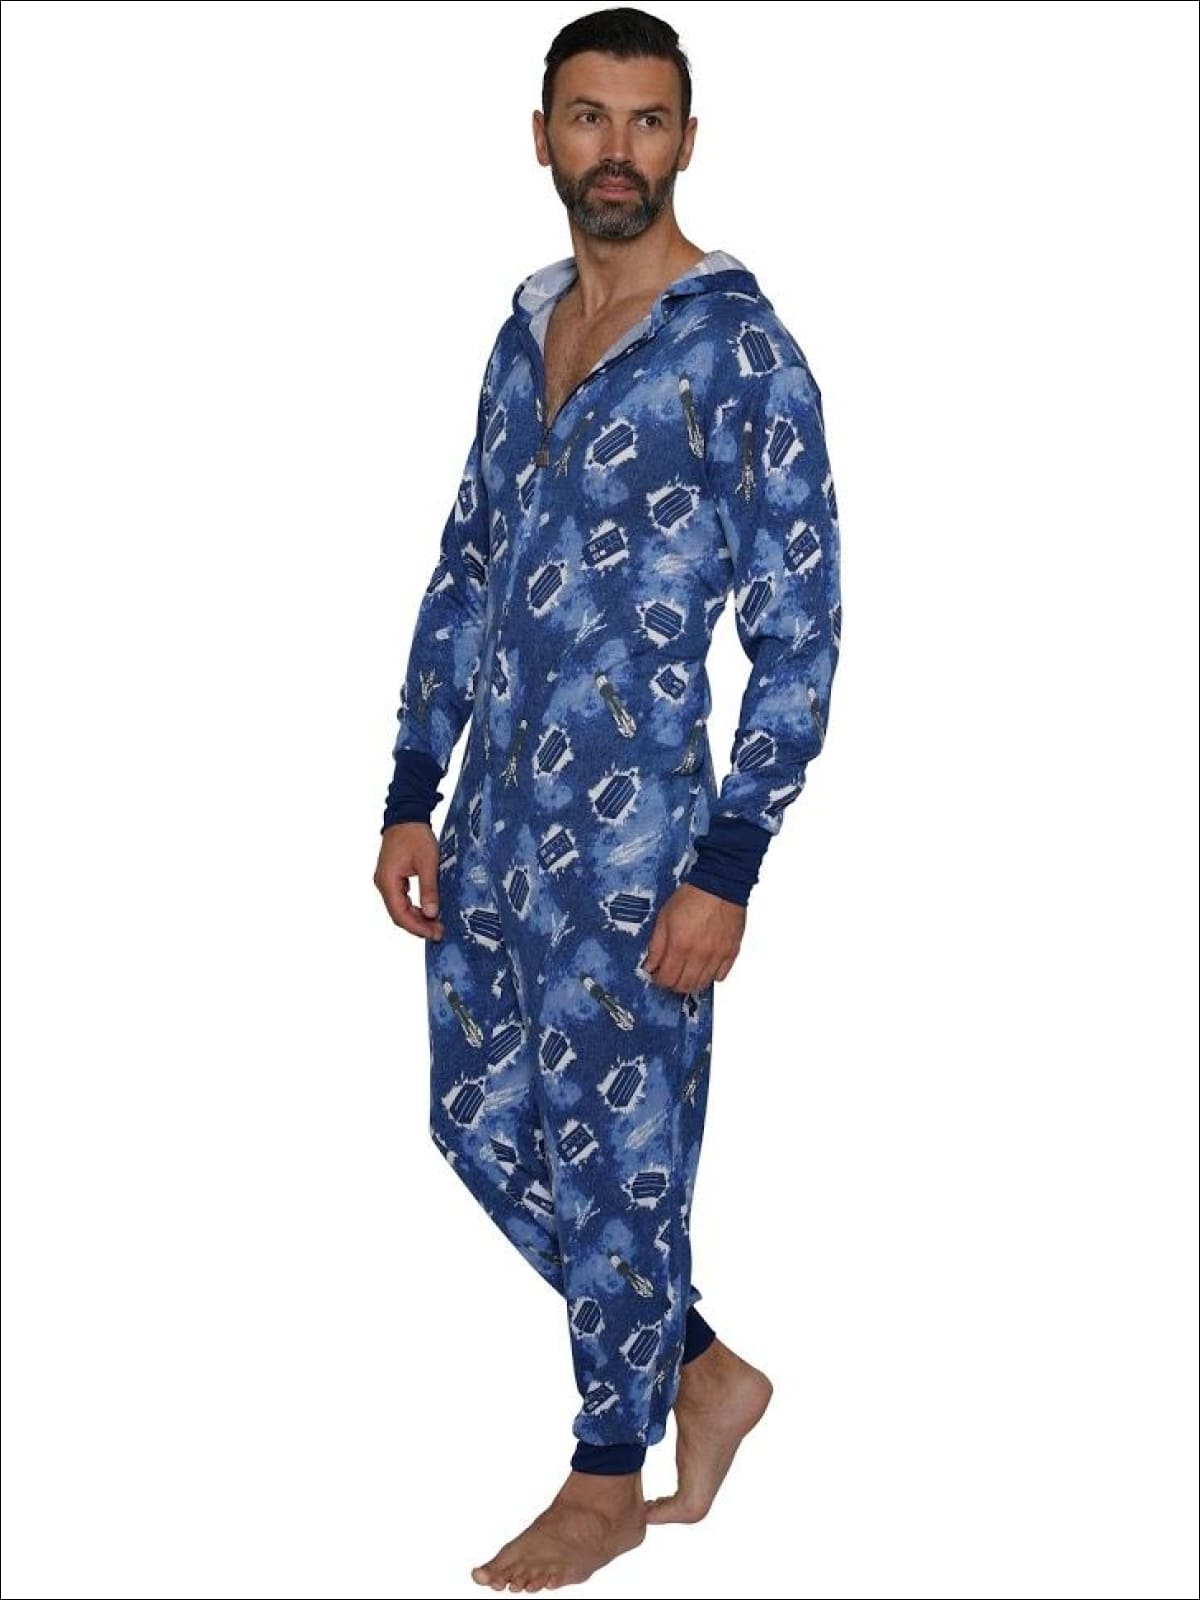 Doctor Who Hooded Galaxy Sonic Screwdriver Lounger Union Suit Onesie Pajama - S/M / Blue